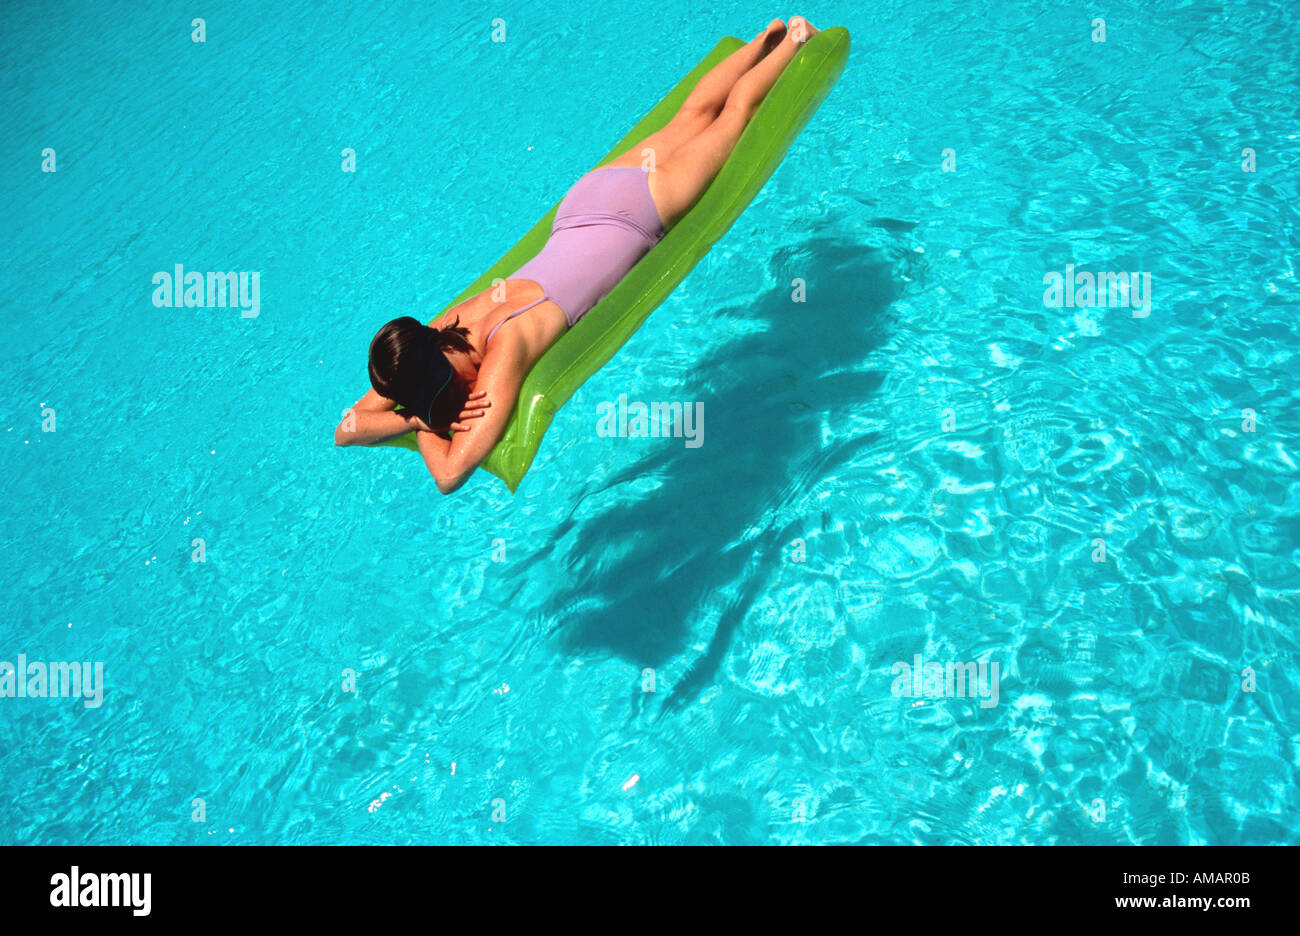 woman female floating on inflatable air bed lilo on water in bright blue swimming pool Stock Photo